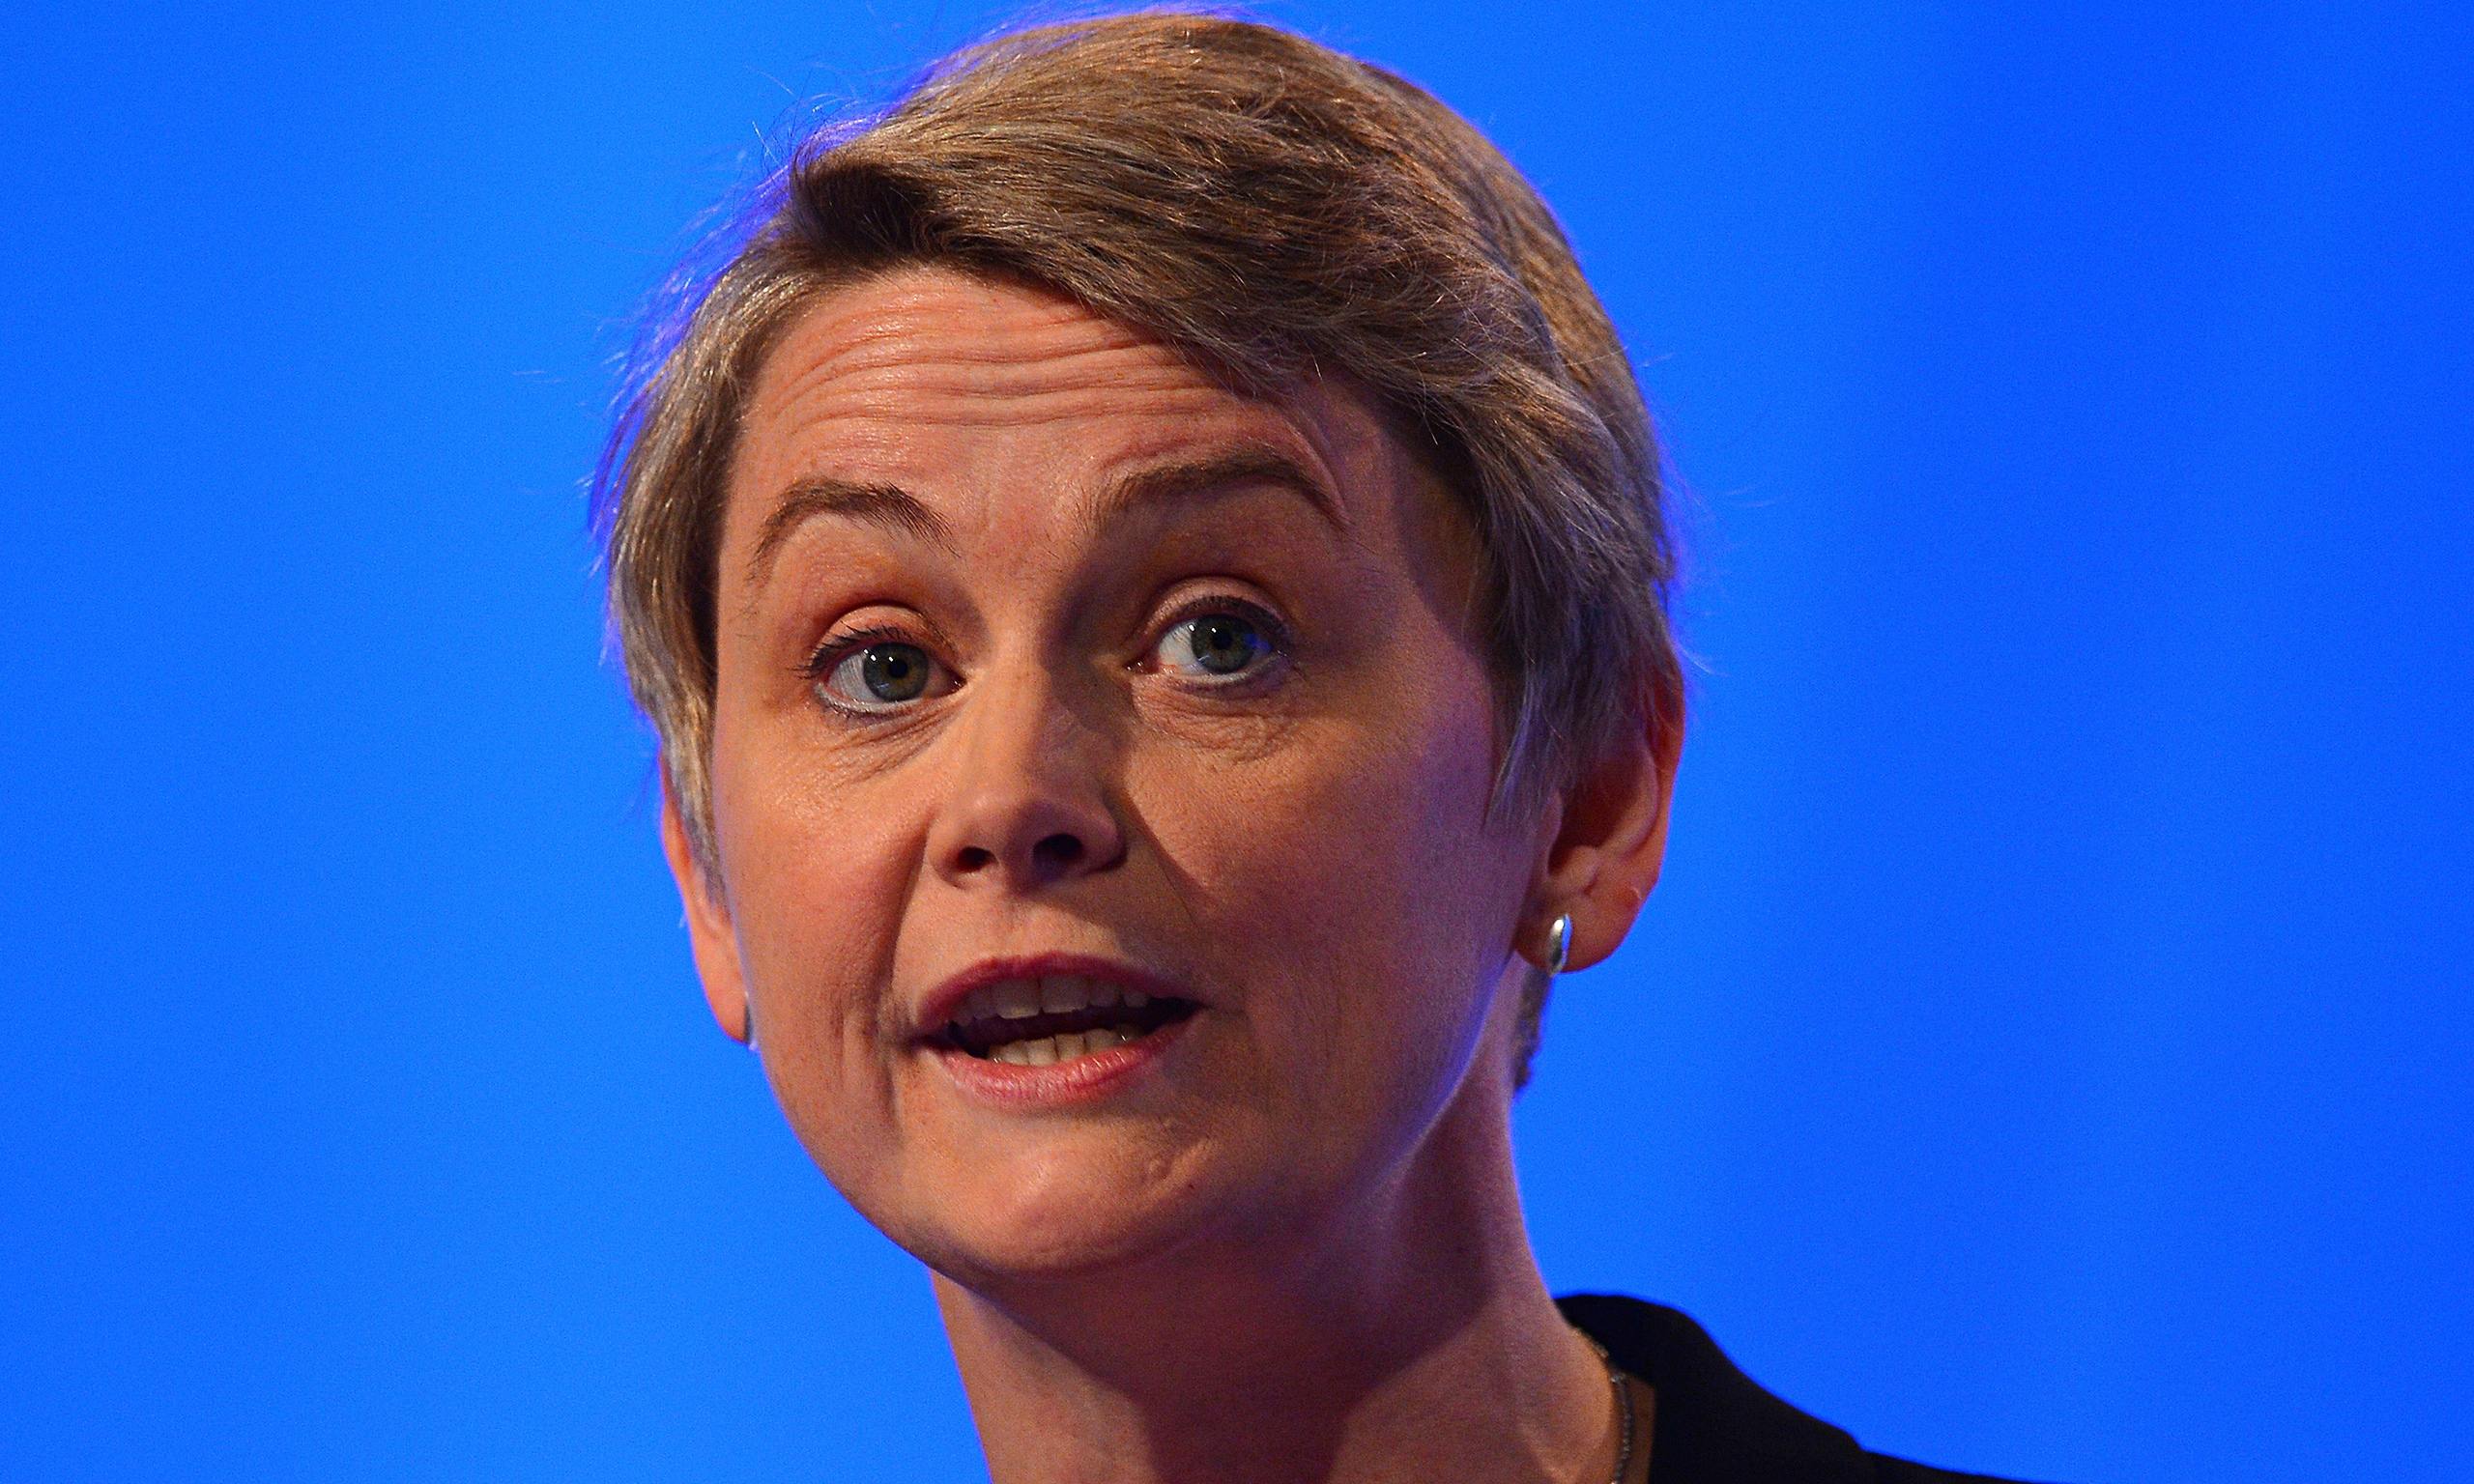 Promotion of women in Tory reshuffle looks last-minute, says Labour ...